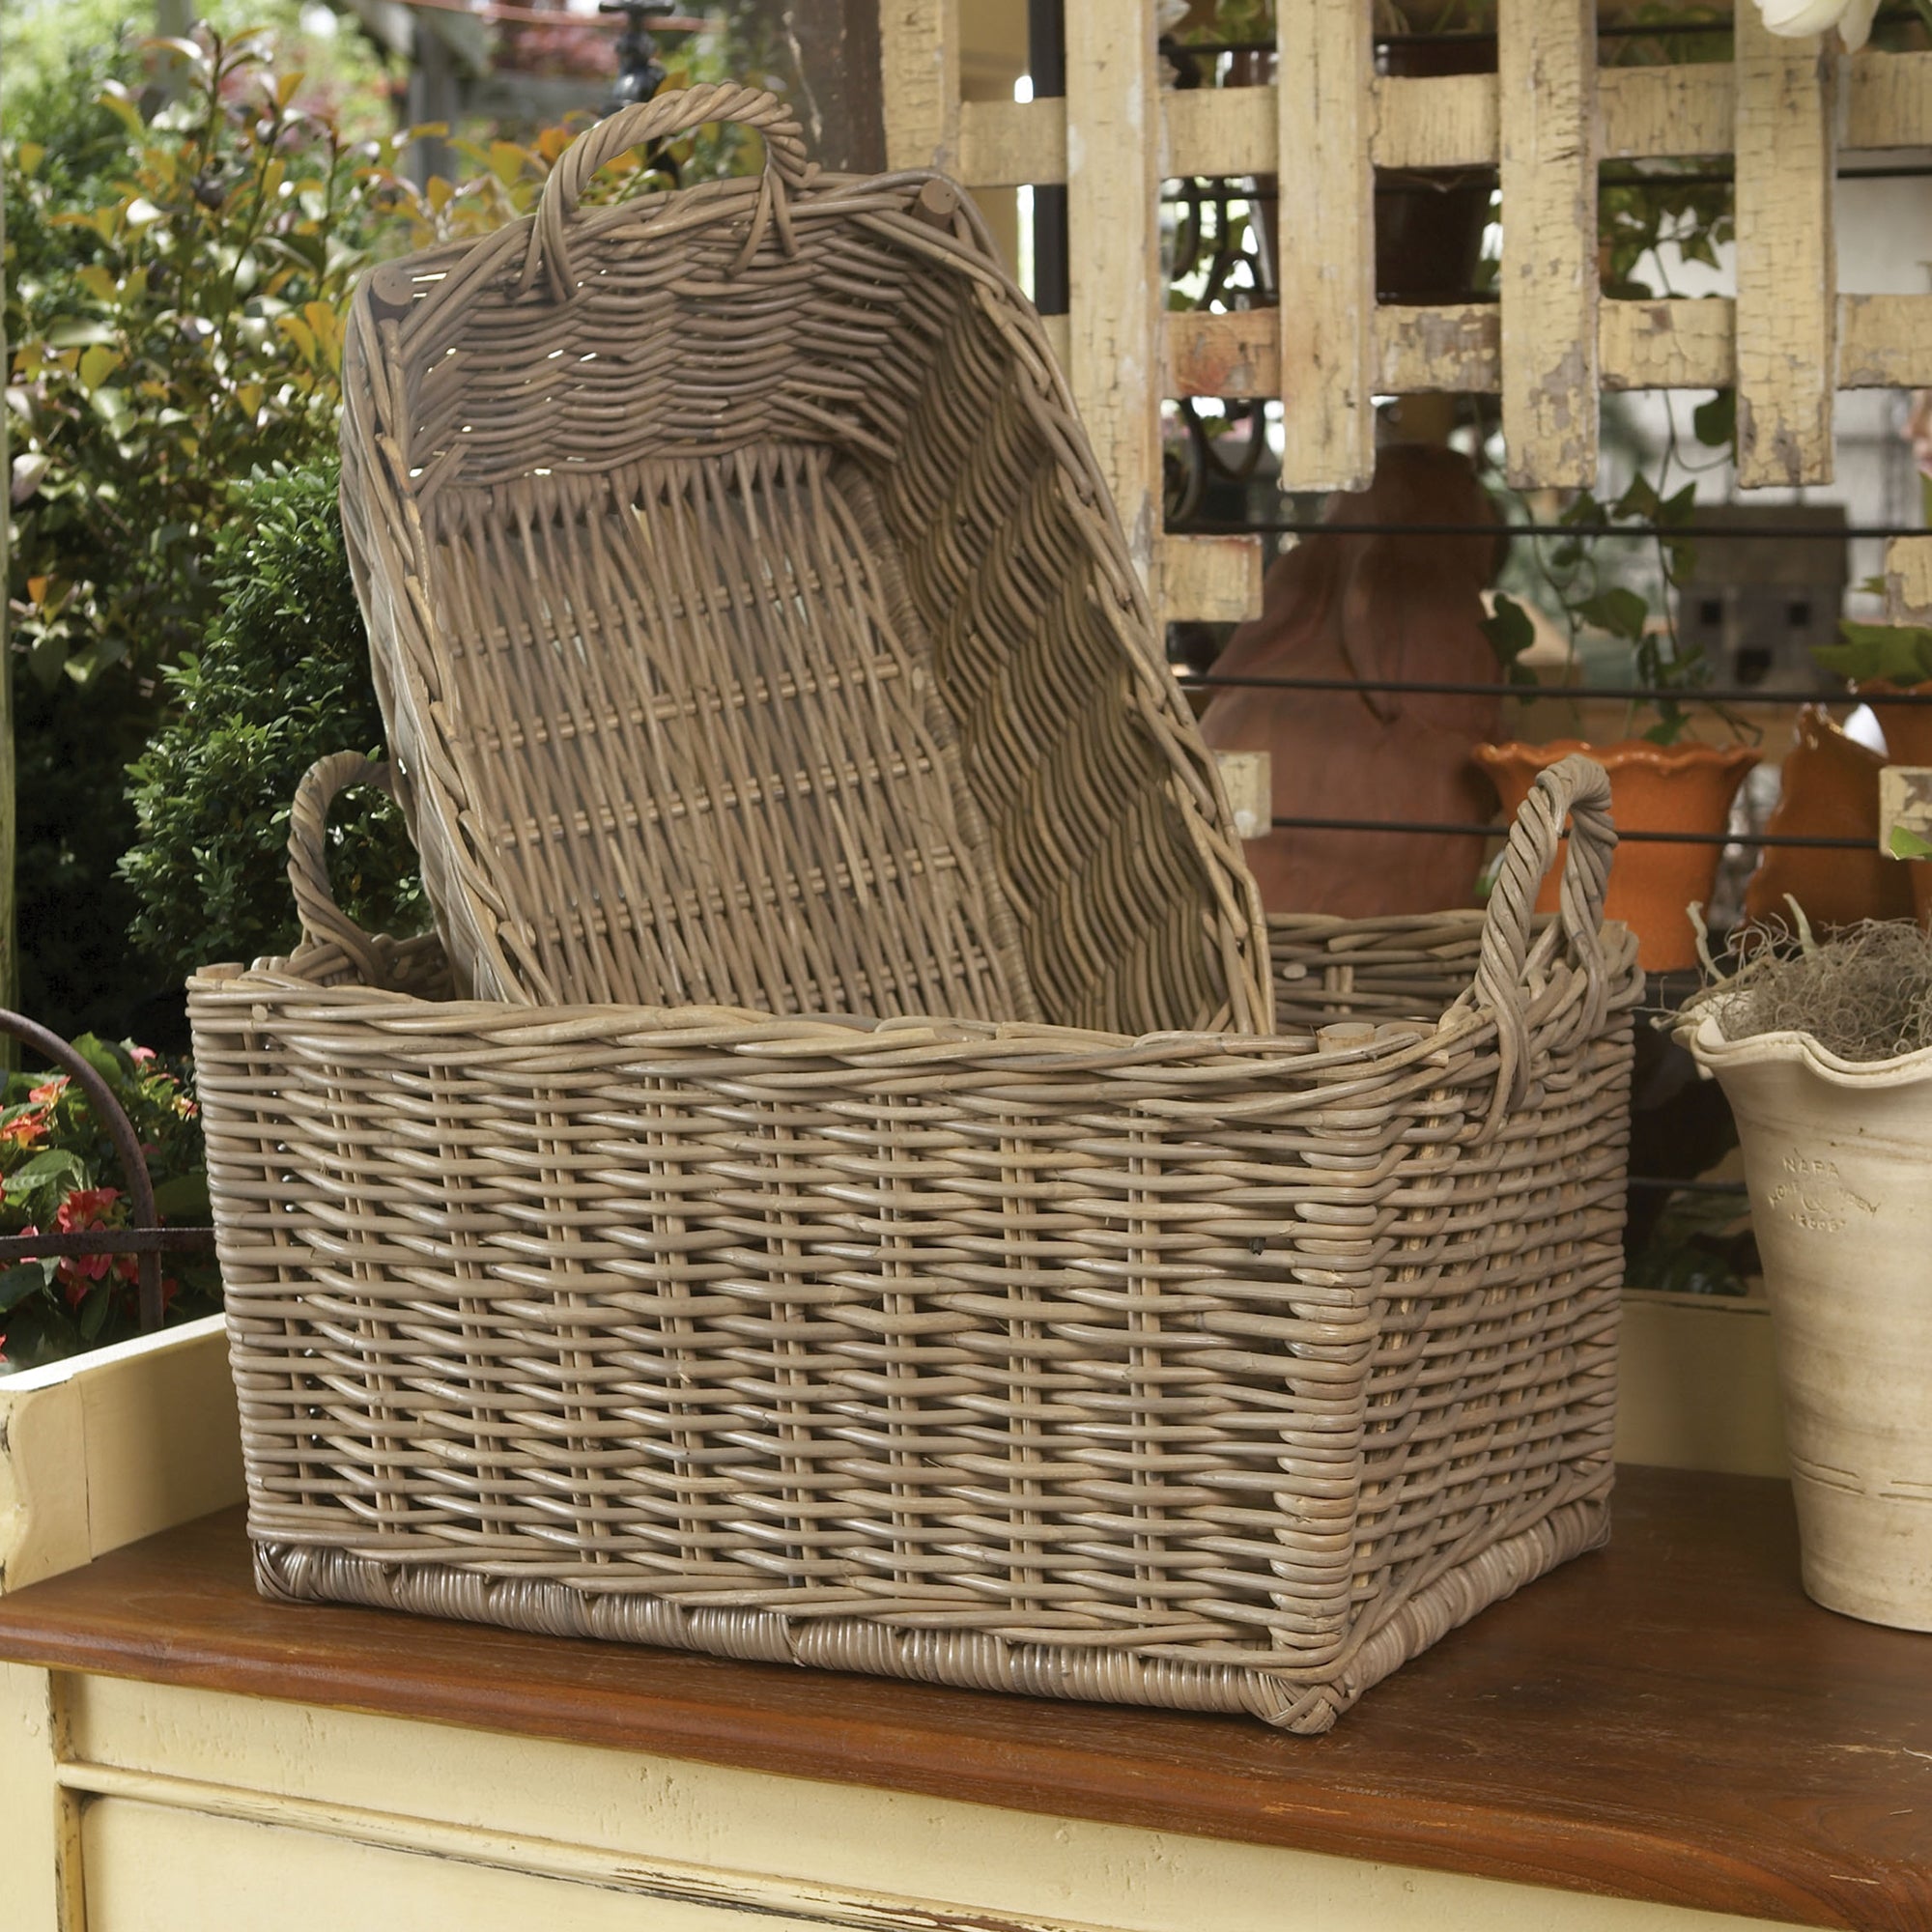 When it comes to the classic, casual appeal of rattan, these baskets are some of the best. They make a great set of laundry baskets or any thing you need stored beautifully. Amethyst Home provides interior design, new construction, custom furniture, and area rugs in the Des Moines metro area.